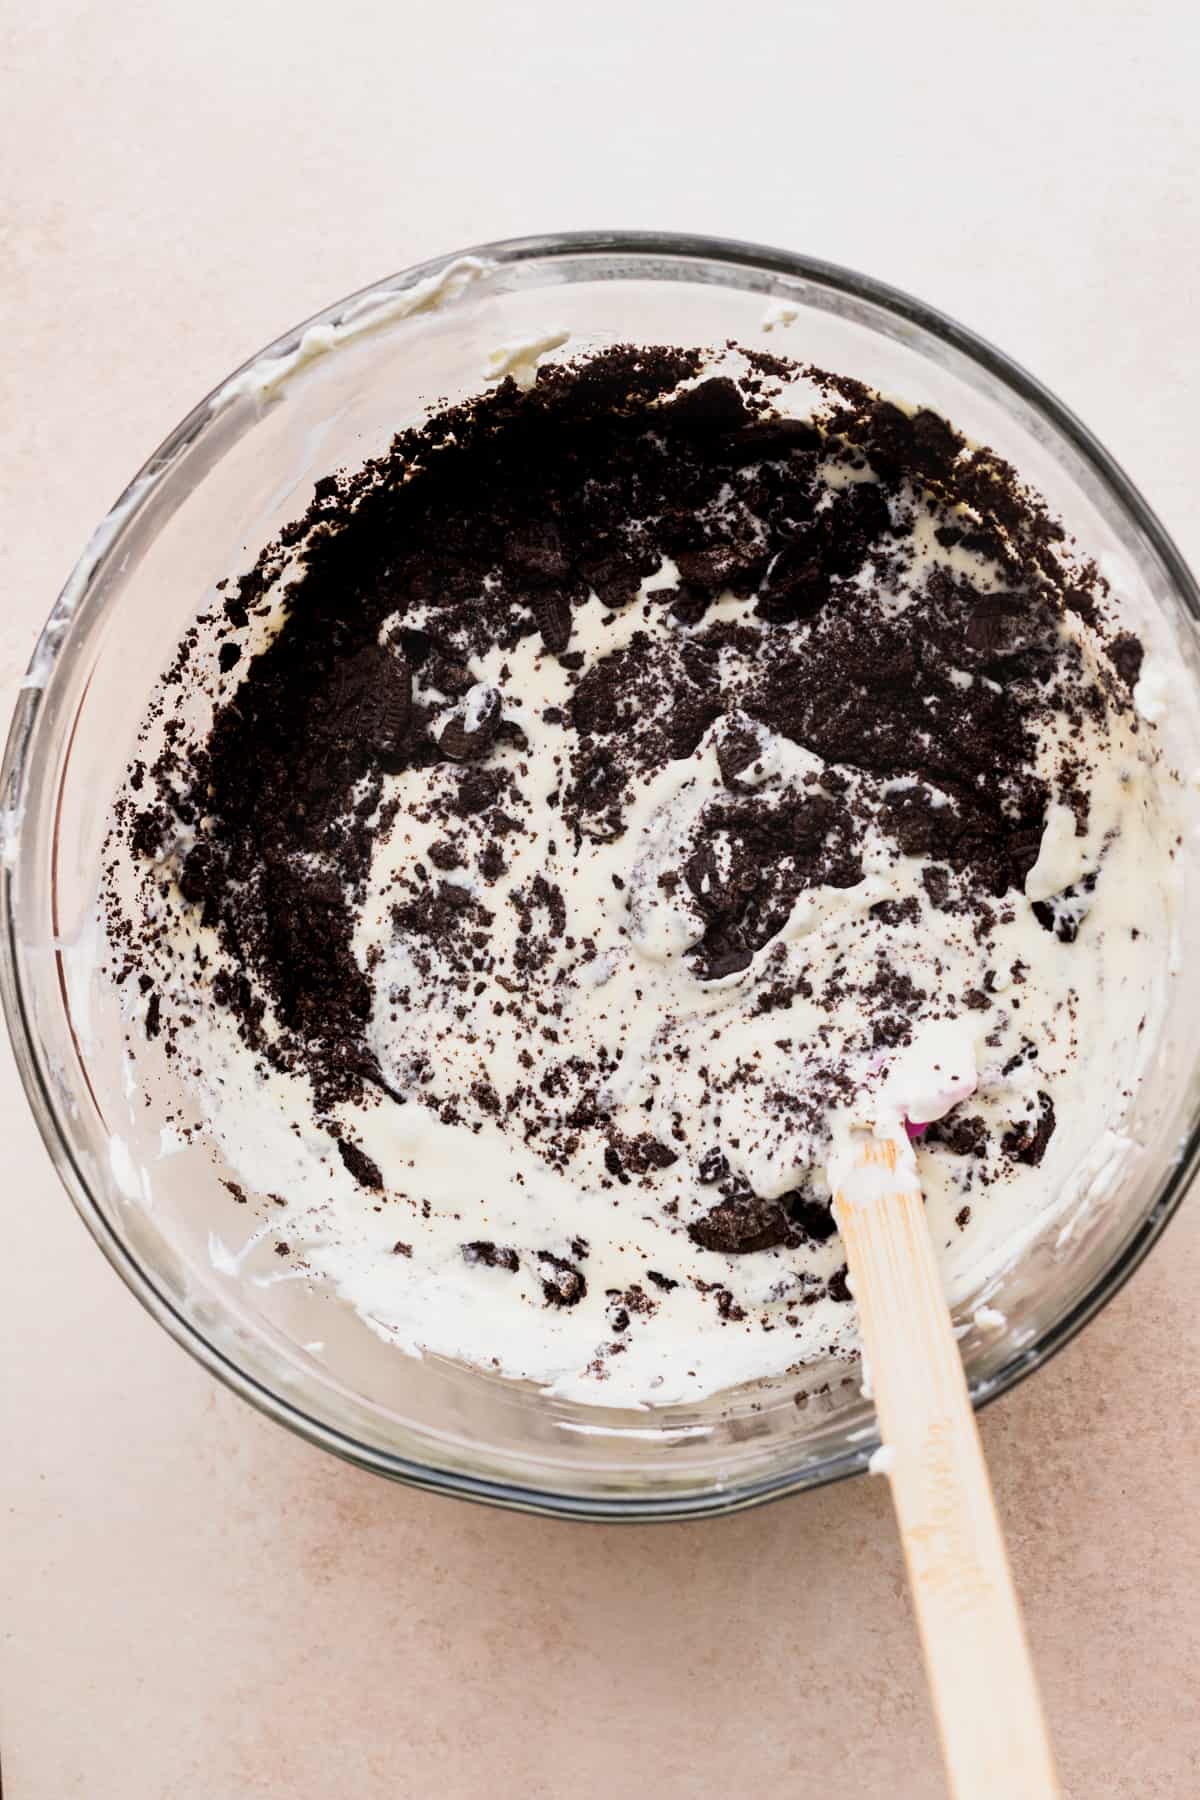 Oreos in the cheesecake batter.